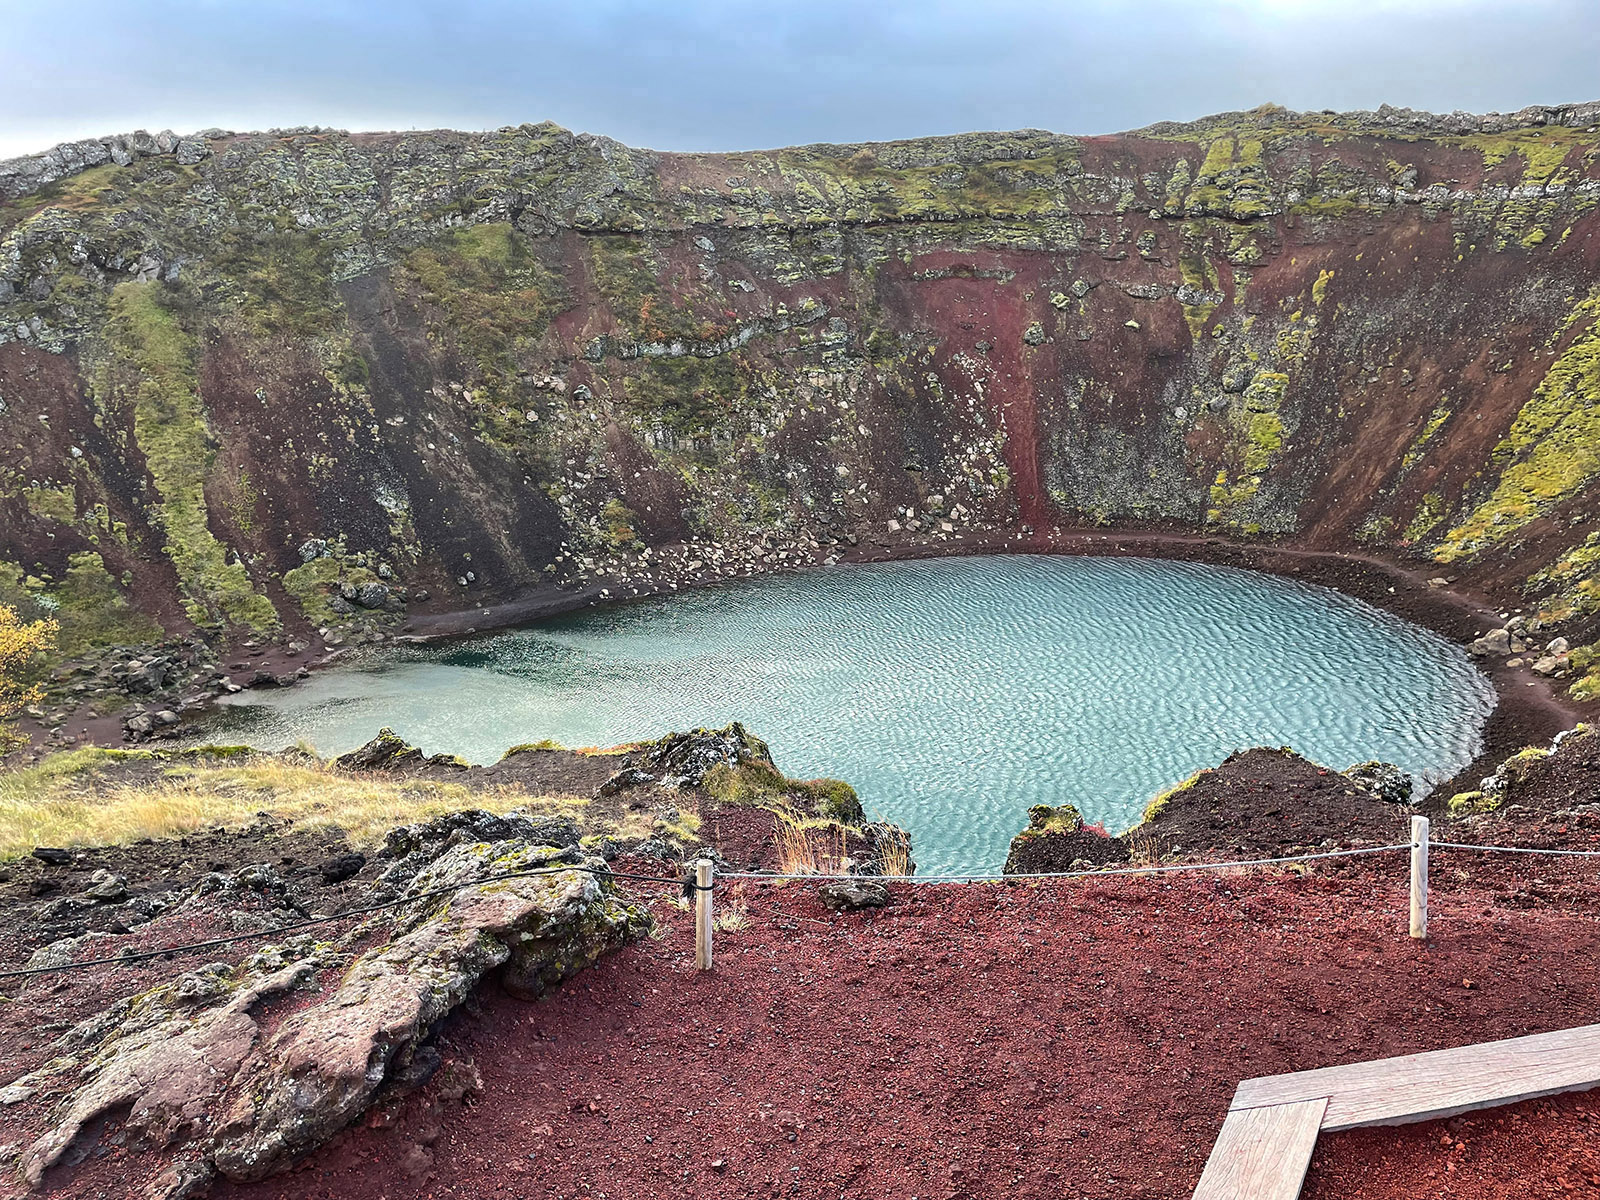 3,000-year-old Kerid volcanic explosion crater and lake on 2nd day of tour.  Photo by Joan Castleman